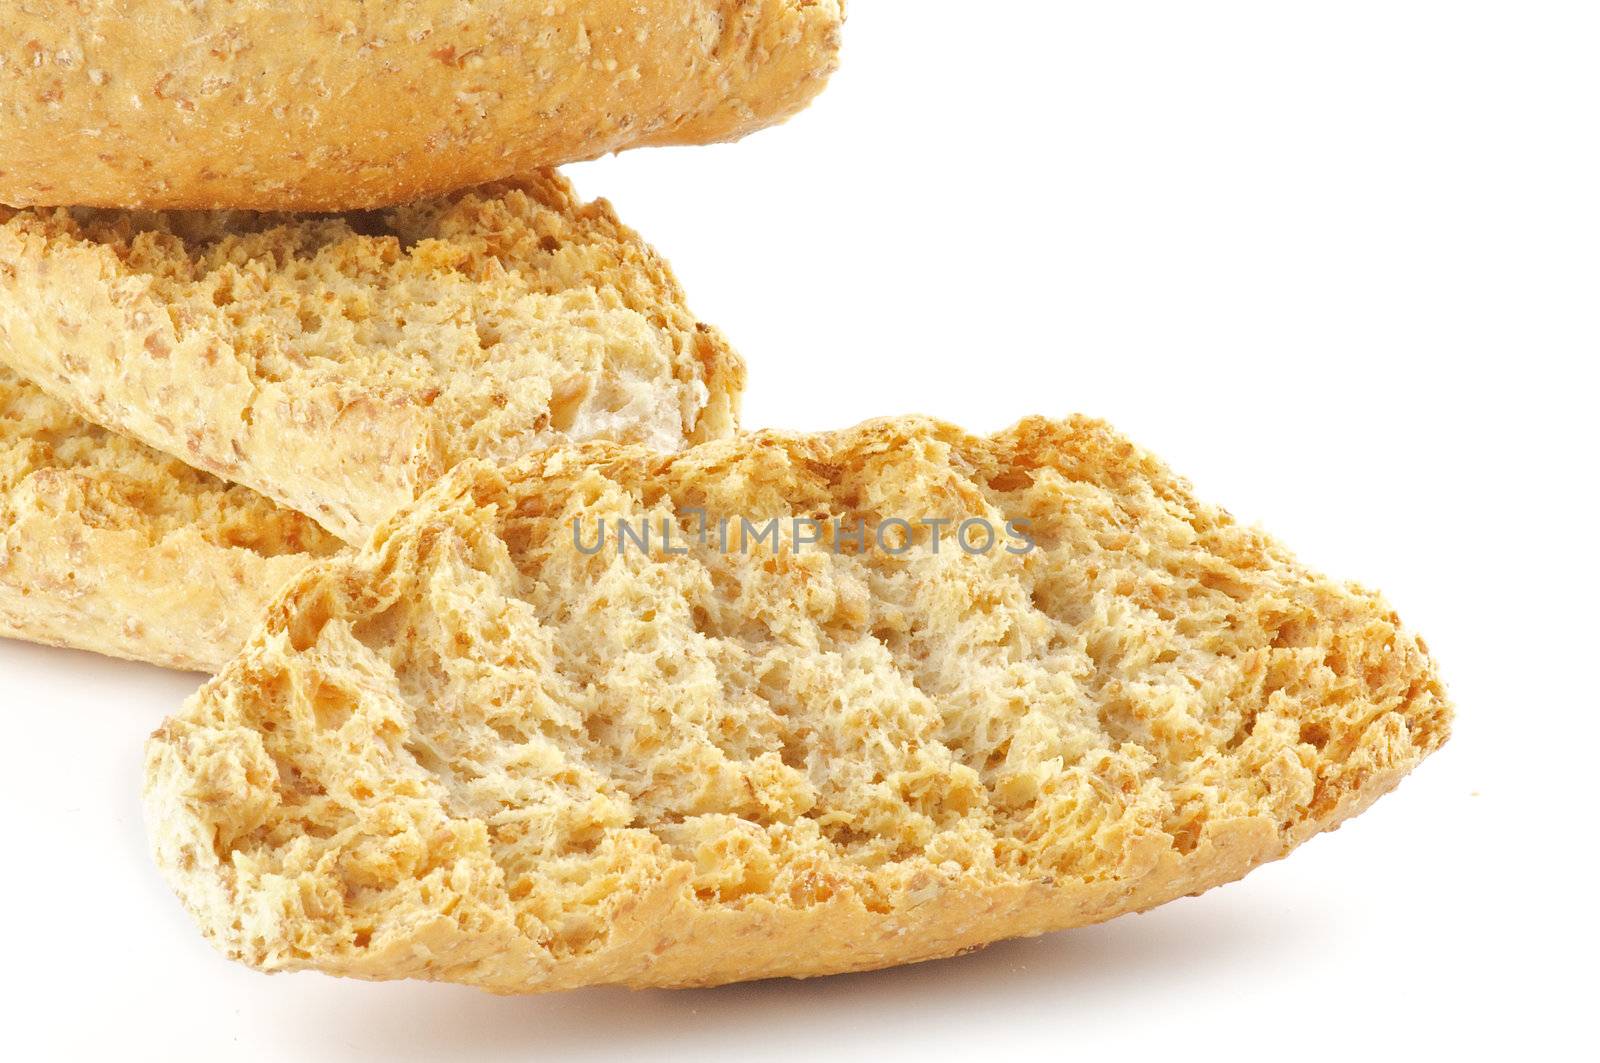 Whole grain biscuits close up by zhekos